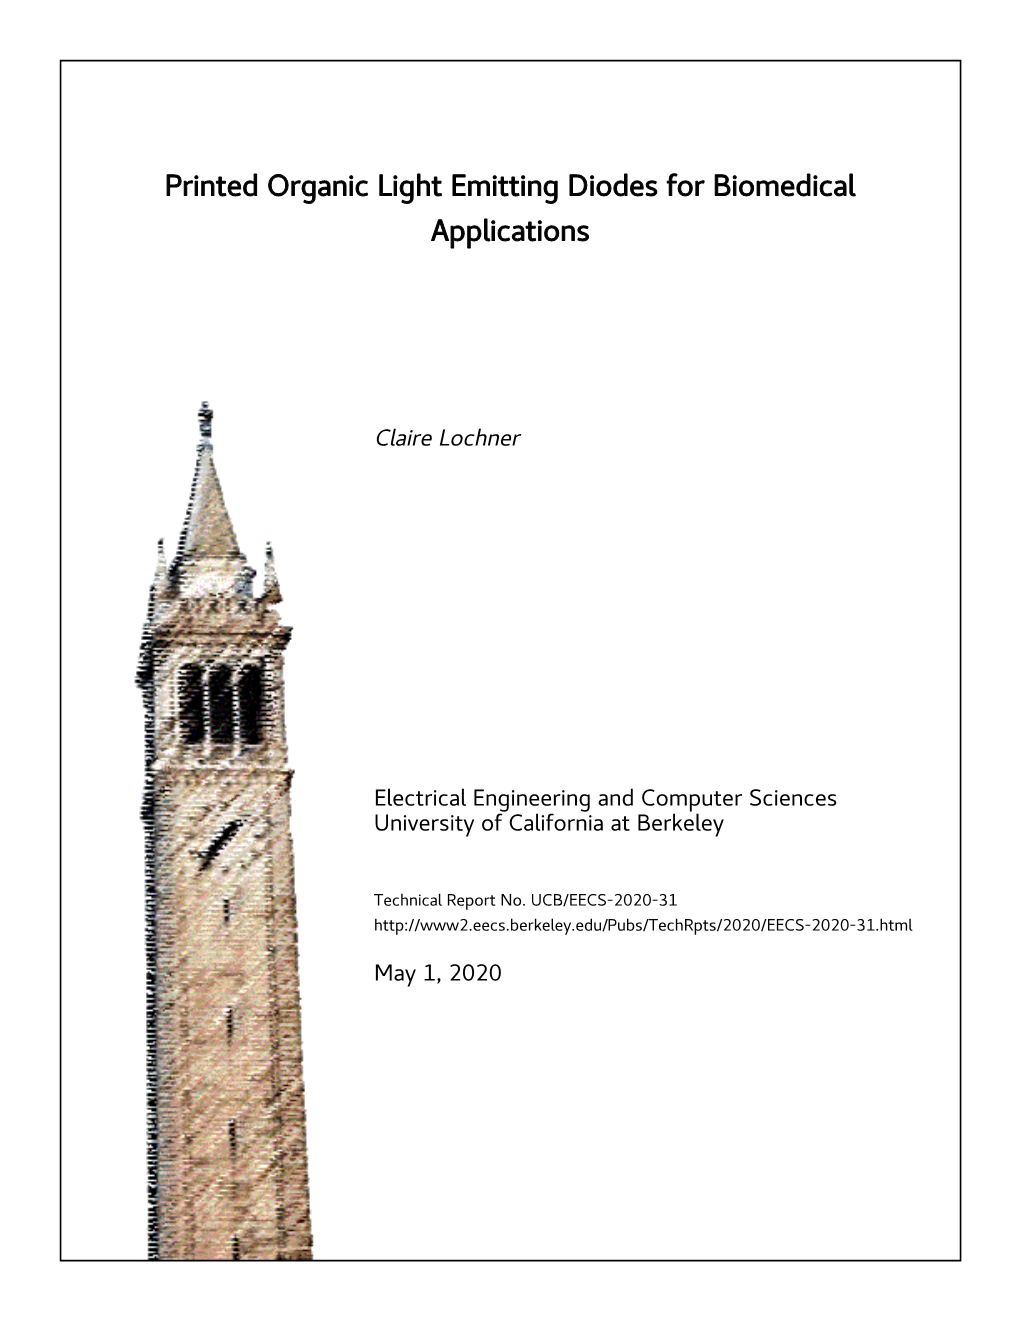 Printed Organic Light Emitting Diodes for Biomedical Applications